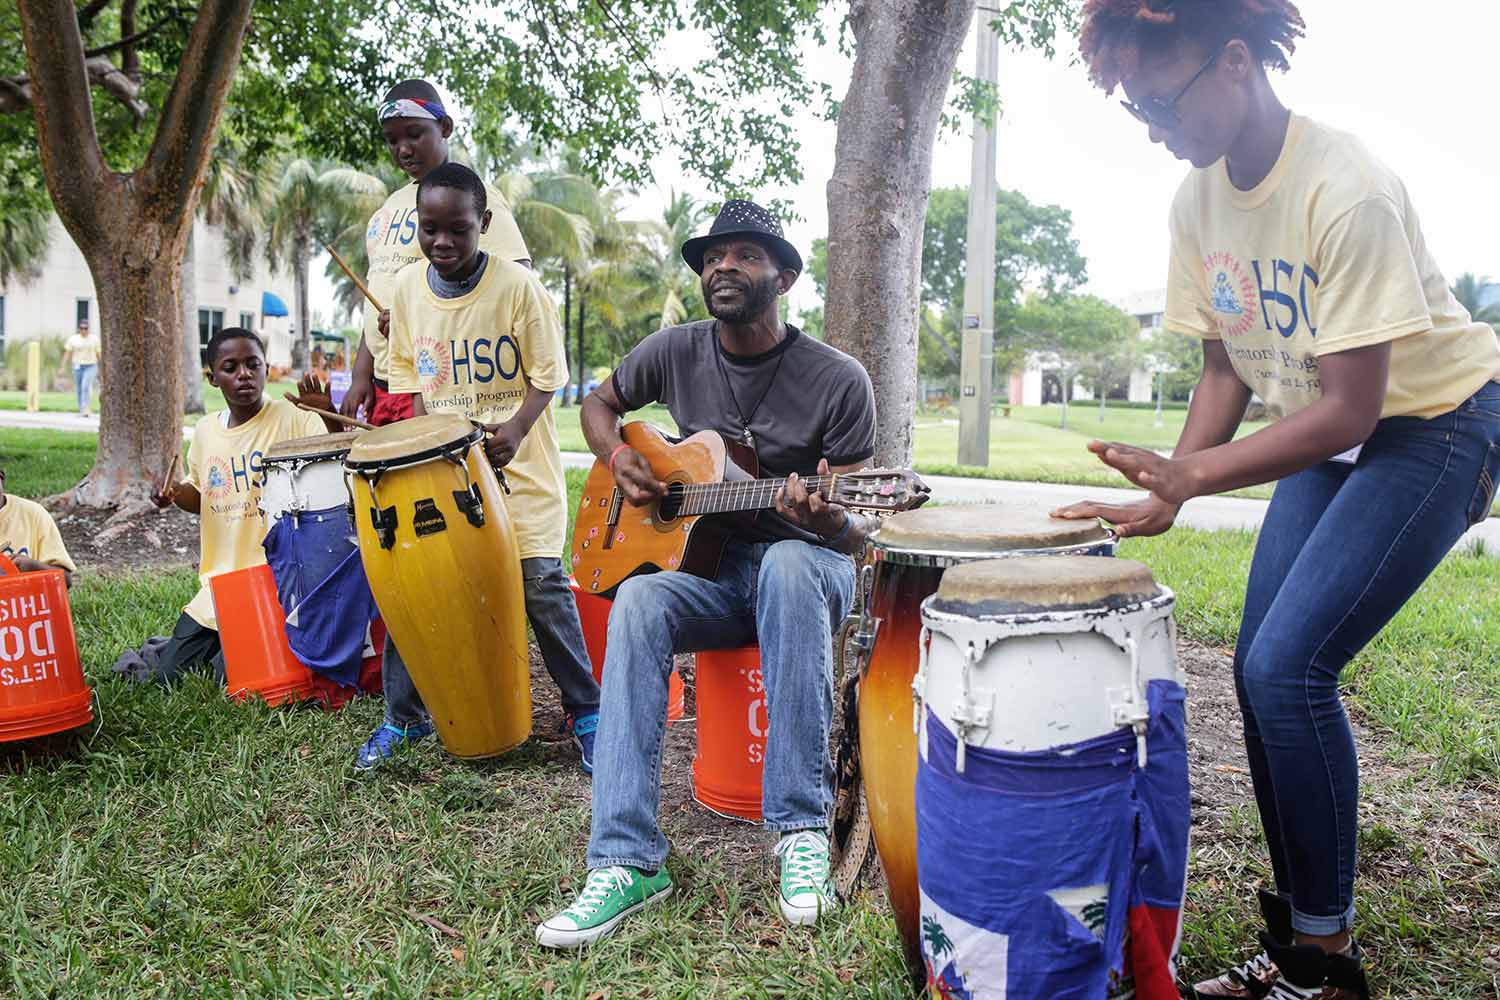 Traditional Haitian music band performing at a park